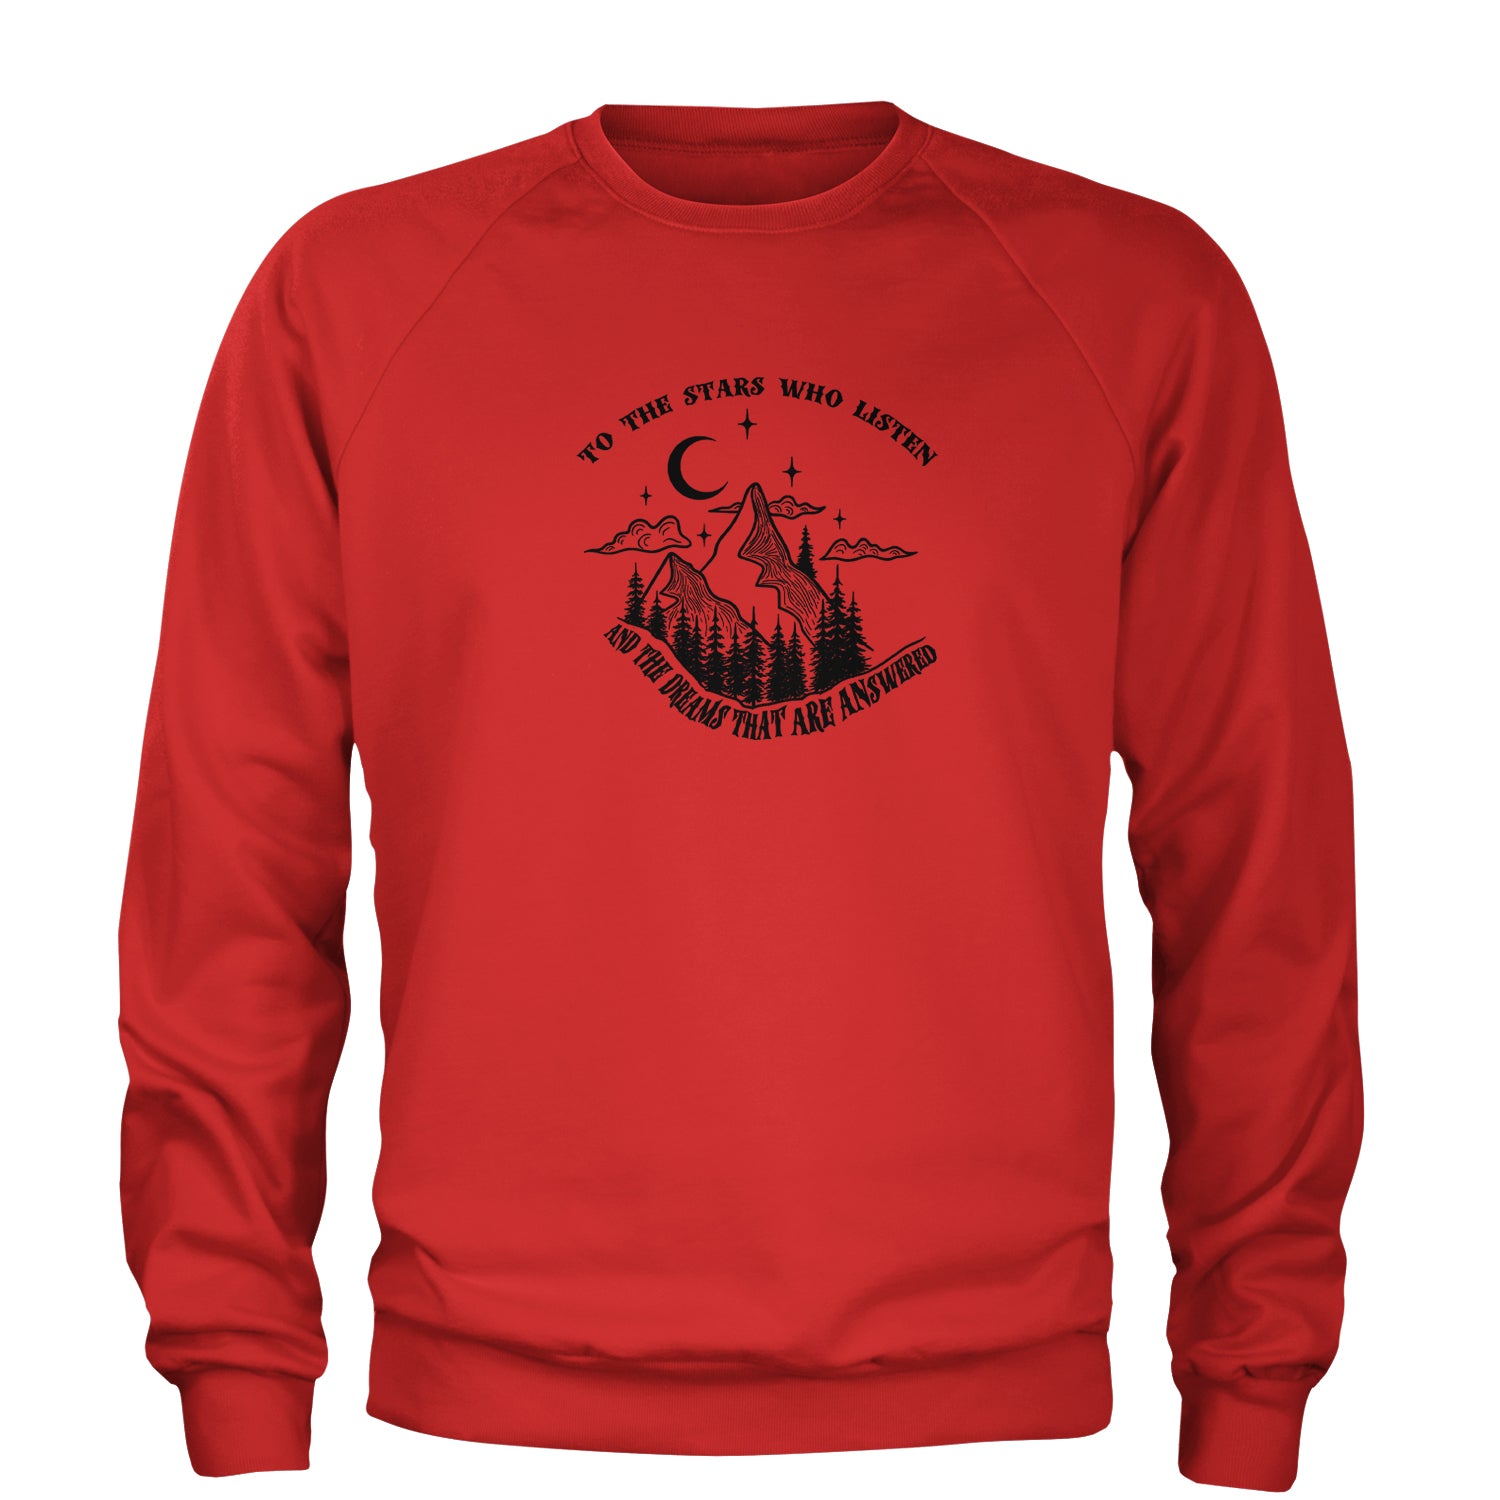 To The Stars Who Listen… ACOTAR Quote Adult Crewneck Sweatshirt acotar, court, tamlin, thorns by Expression Tees